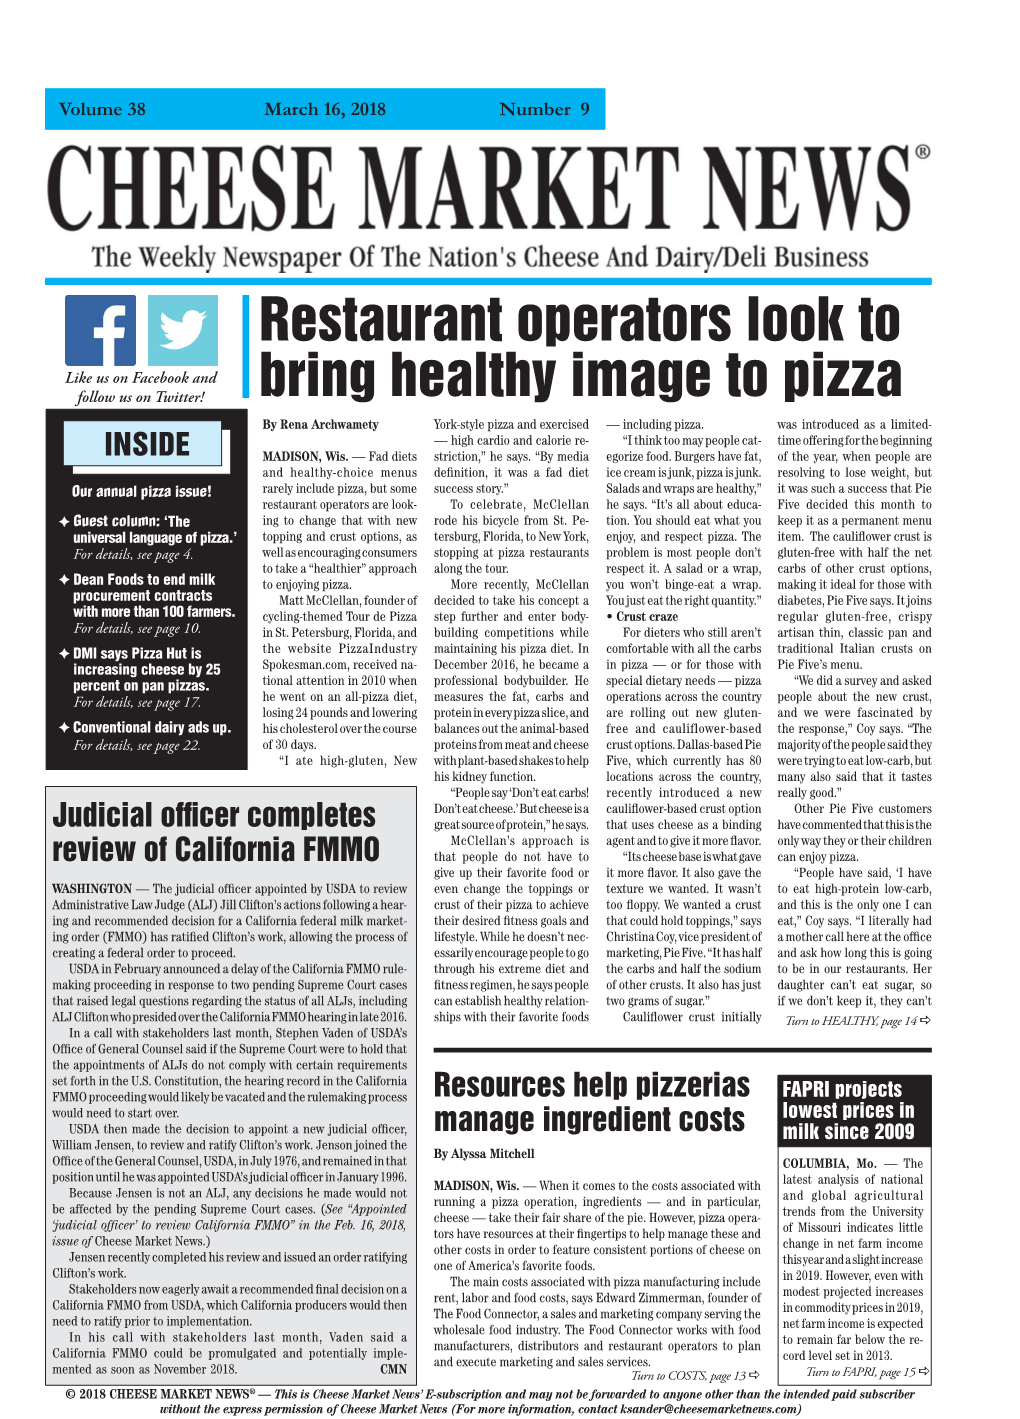 Restaurant Operators Look to Bring Healthy Image to Pizza